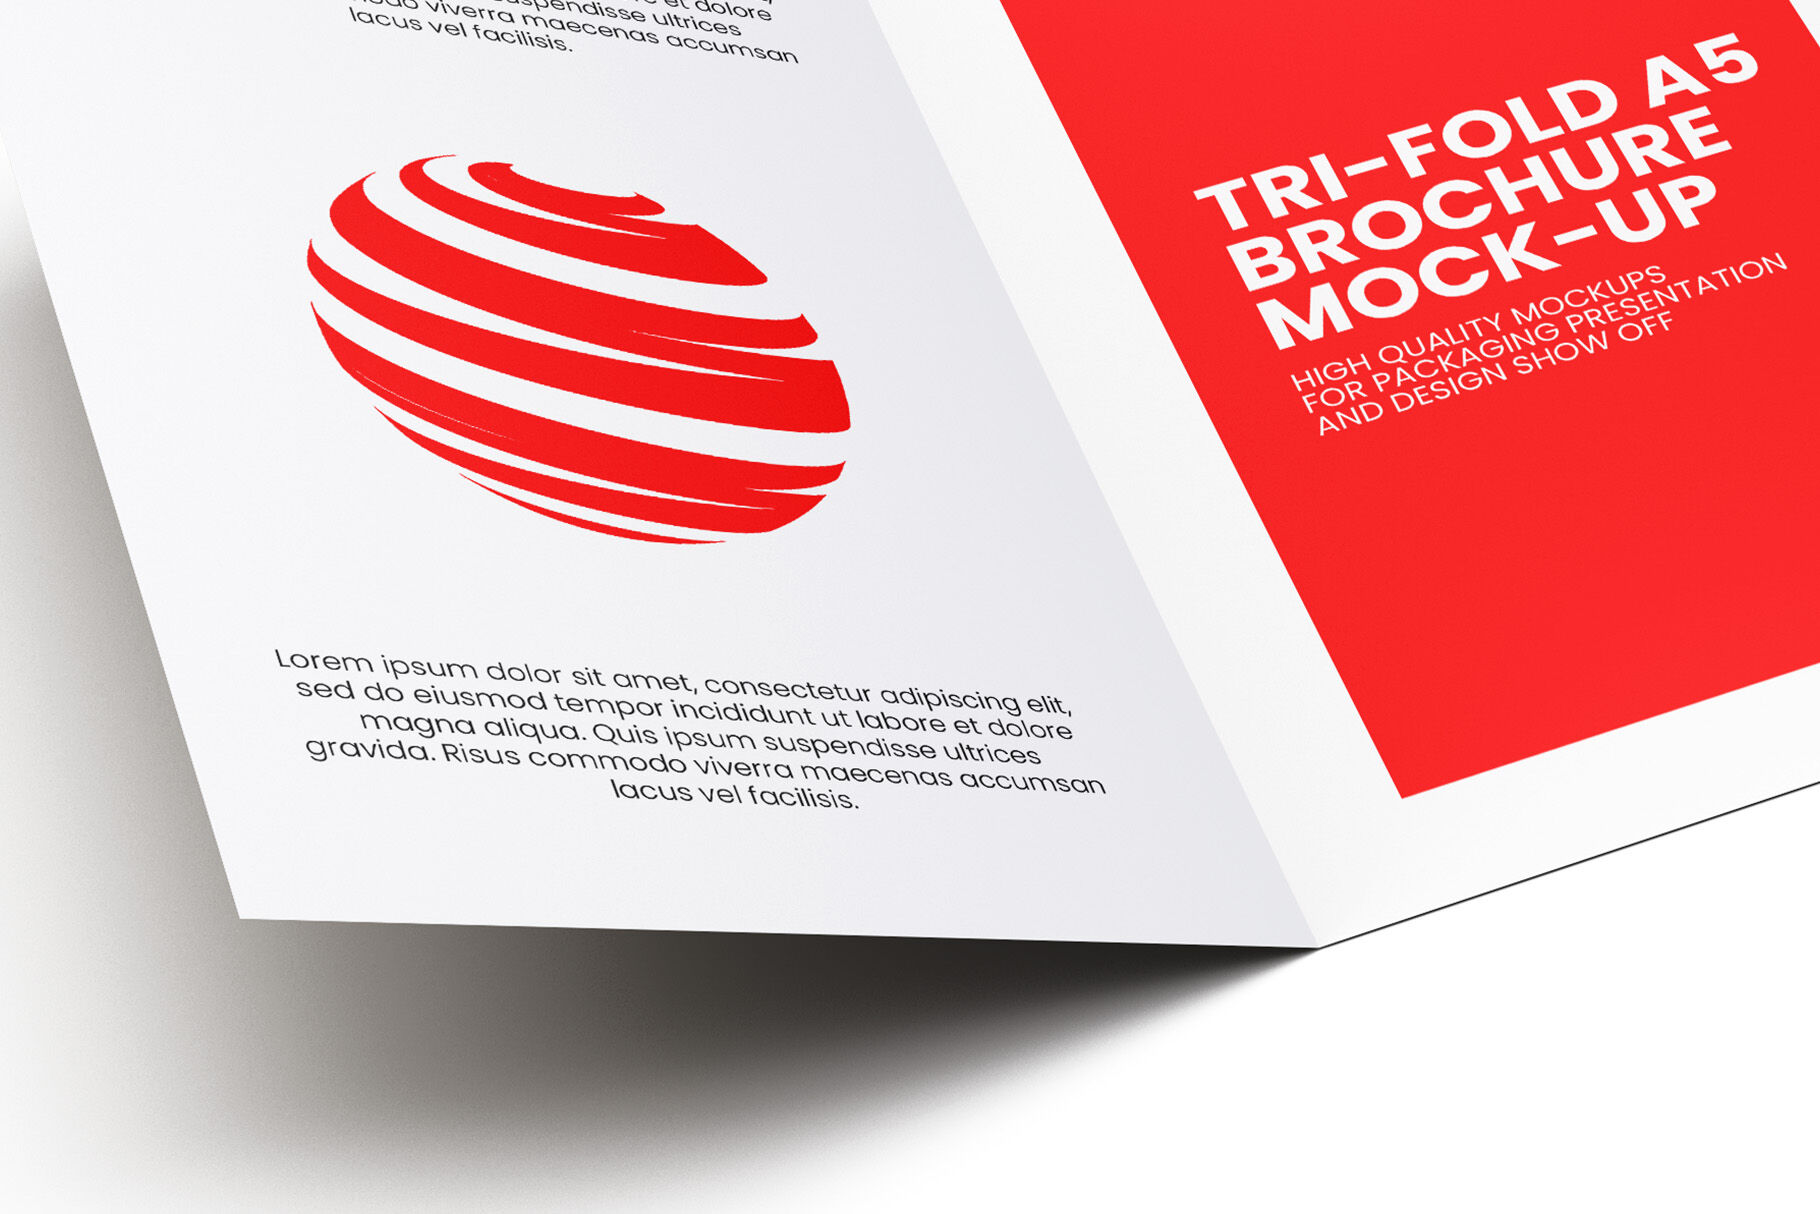 Download Tri-Fold A5 Brochure Mock-up By Illusiongraphic ...